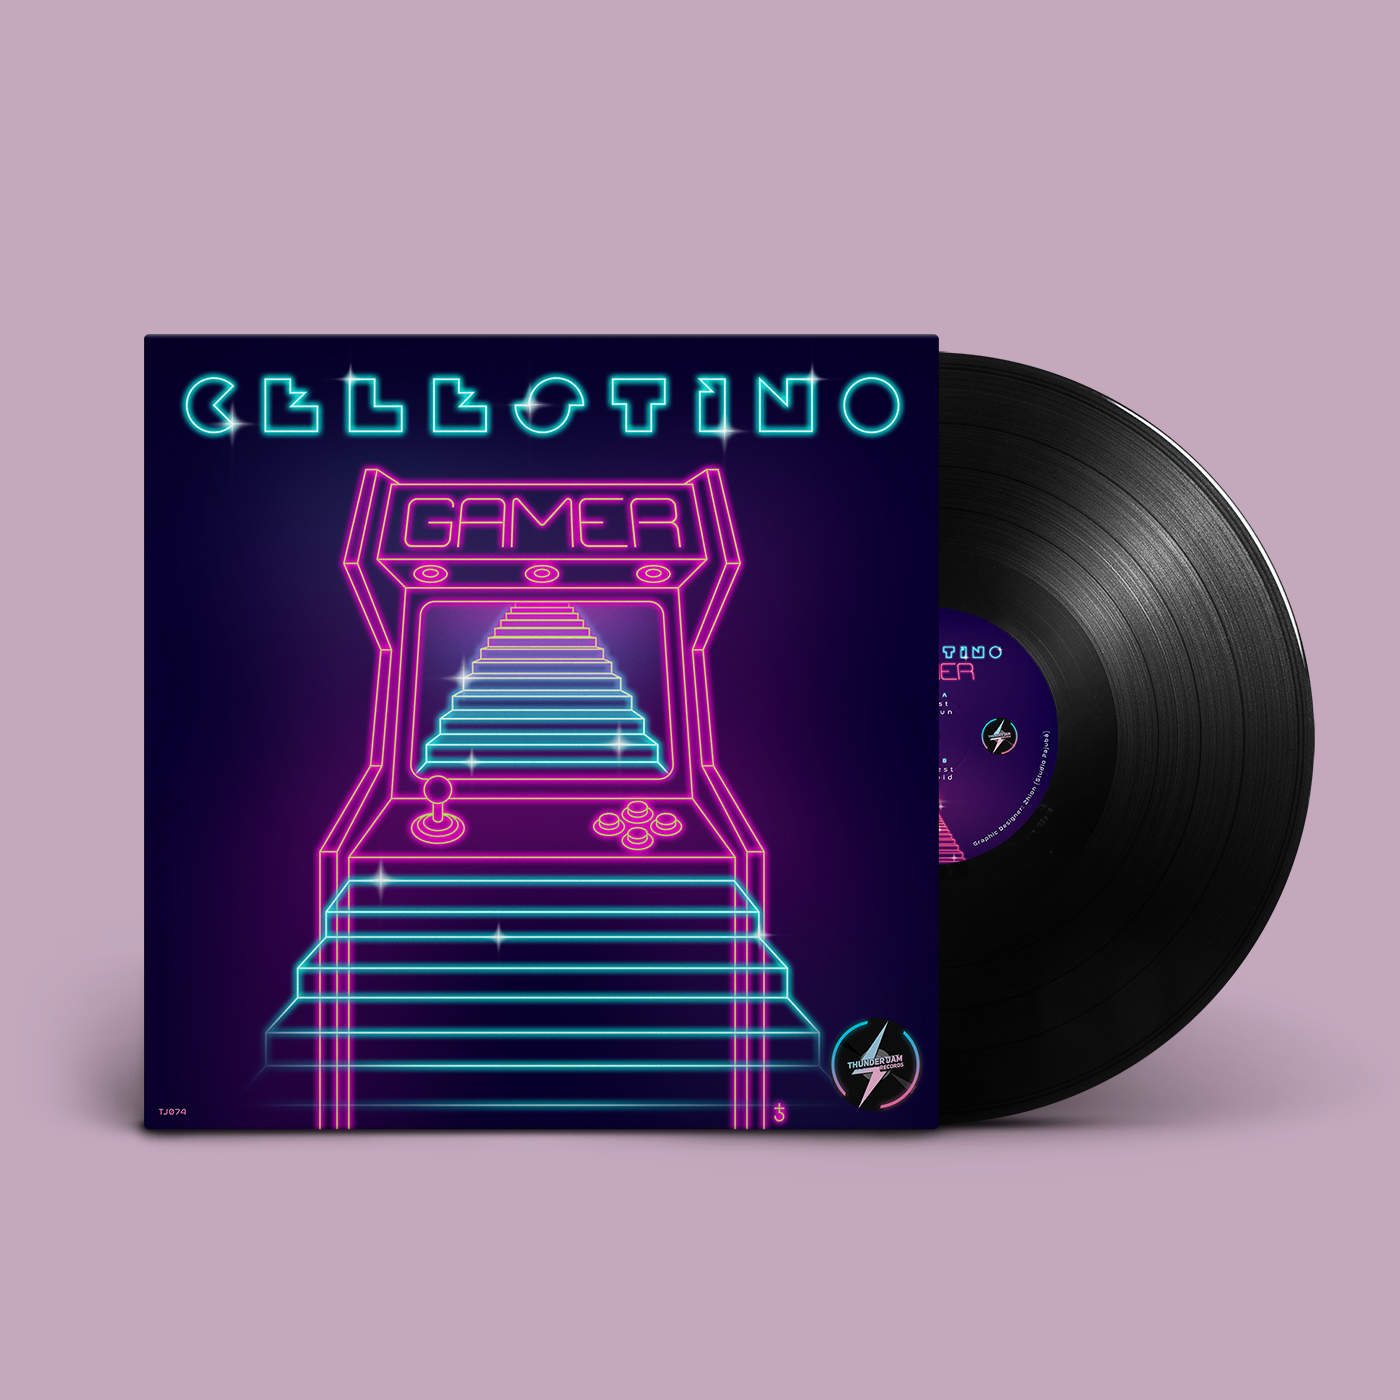 illustration_andre_levy_zhion_vector_pop_music_cover_celestino_ep_gamer_arcade_stairs_neon_retro_80s_nudisco_album.png